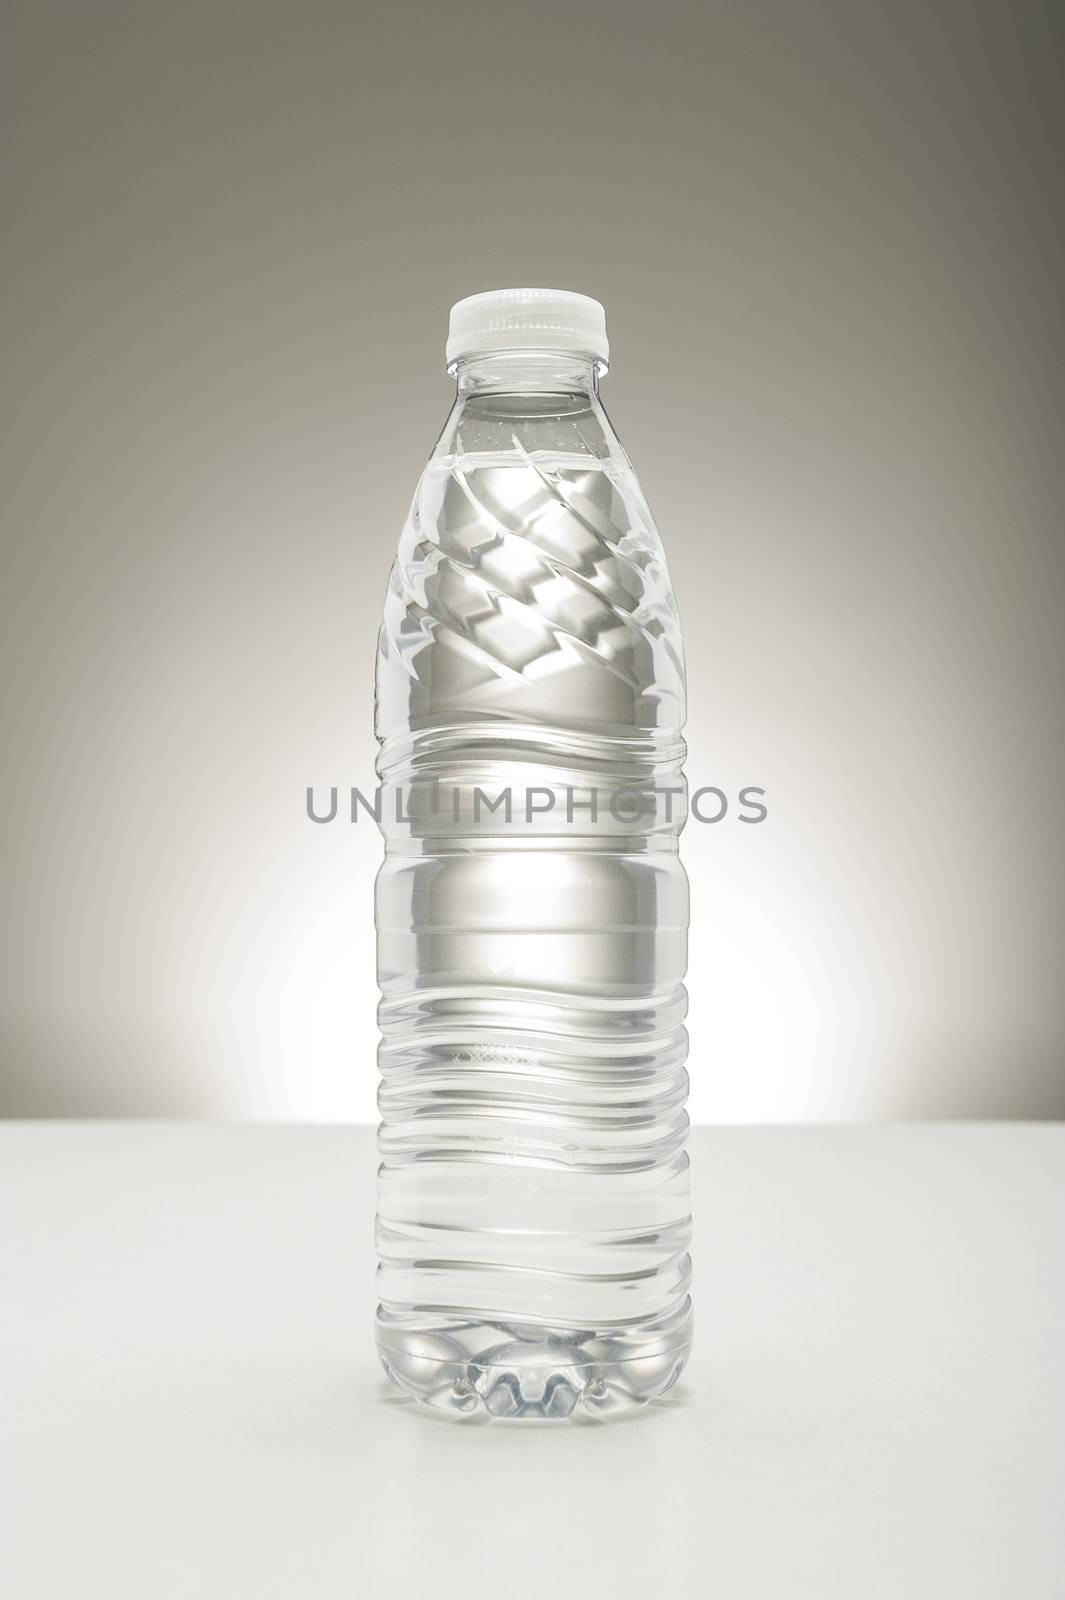 Unlabeled transparent bottle full of pure fresh water, a healthy refreshing drink to quench a thirst and rehydrate the body